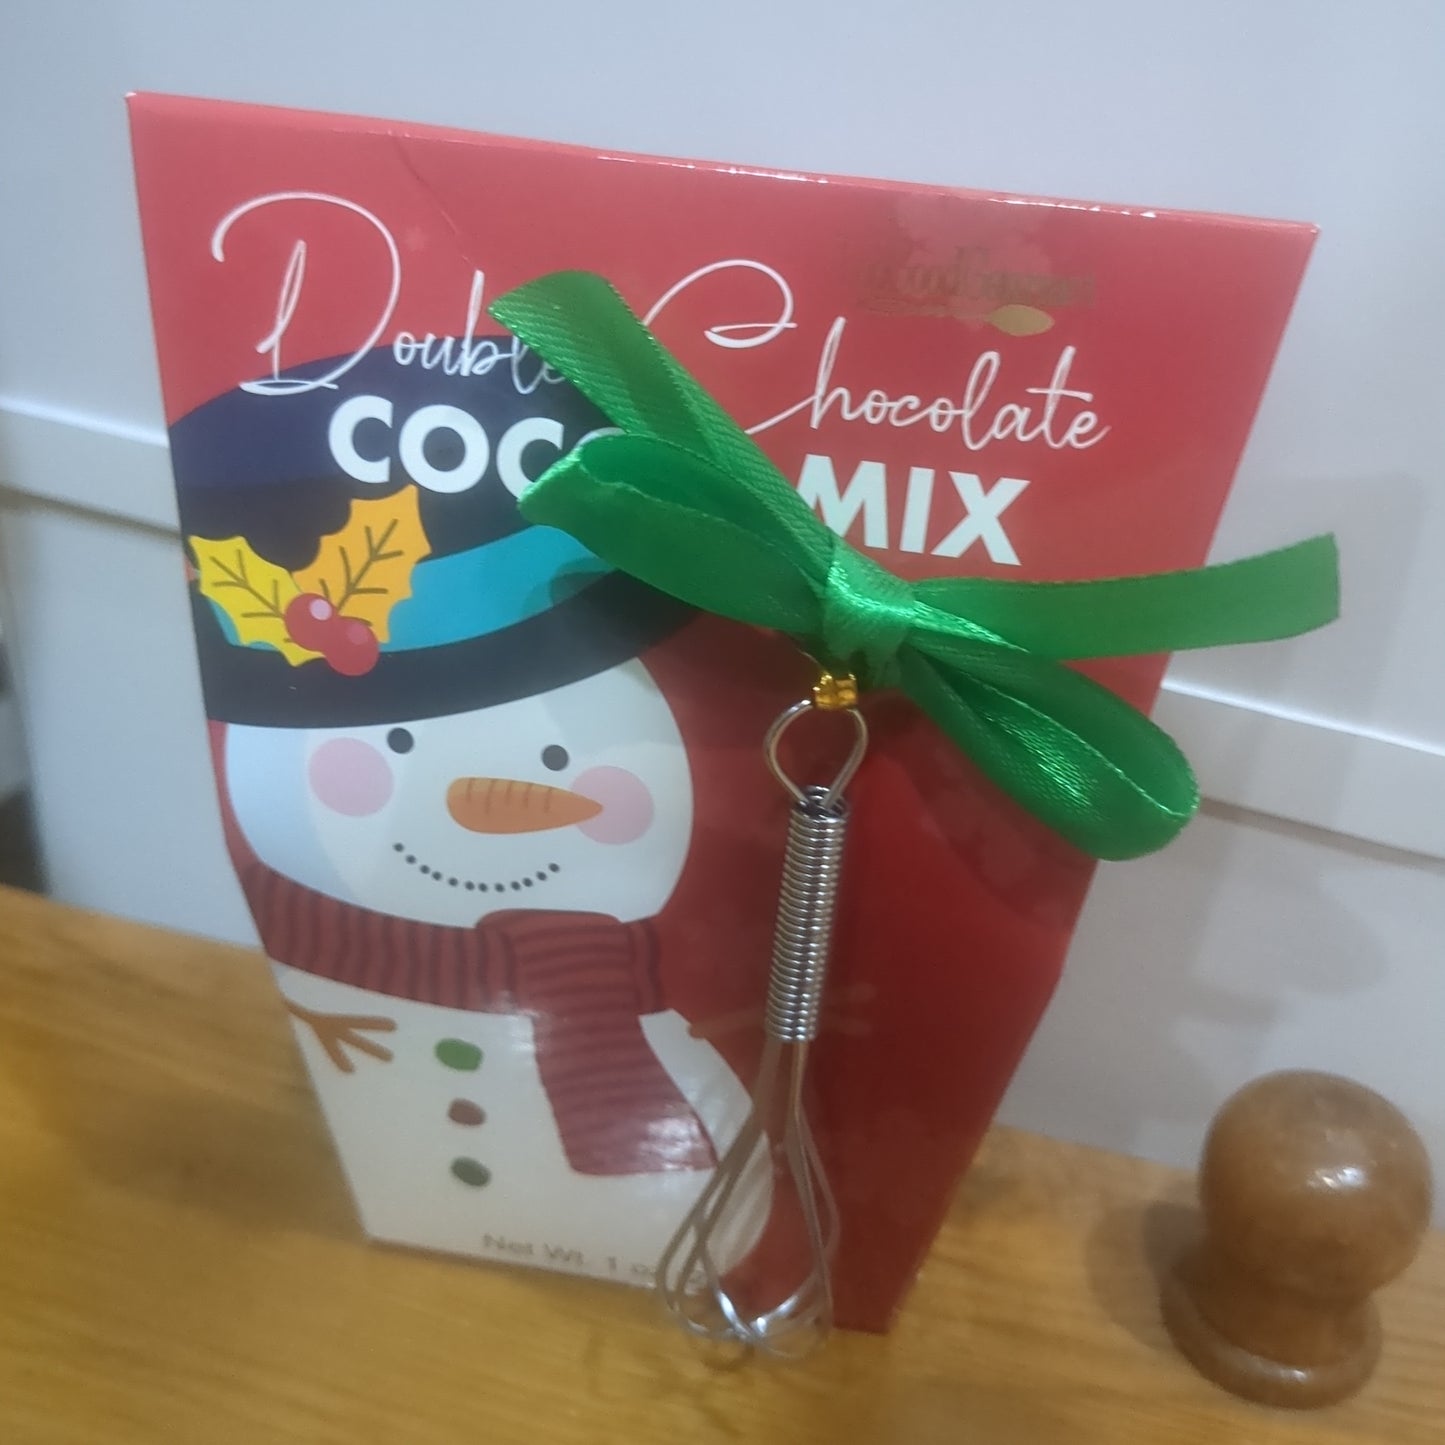 Santa Friend's double chocolate cocoa mix from Too Good Gourmet